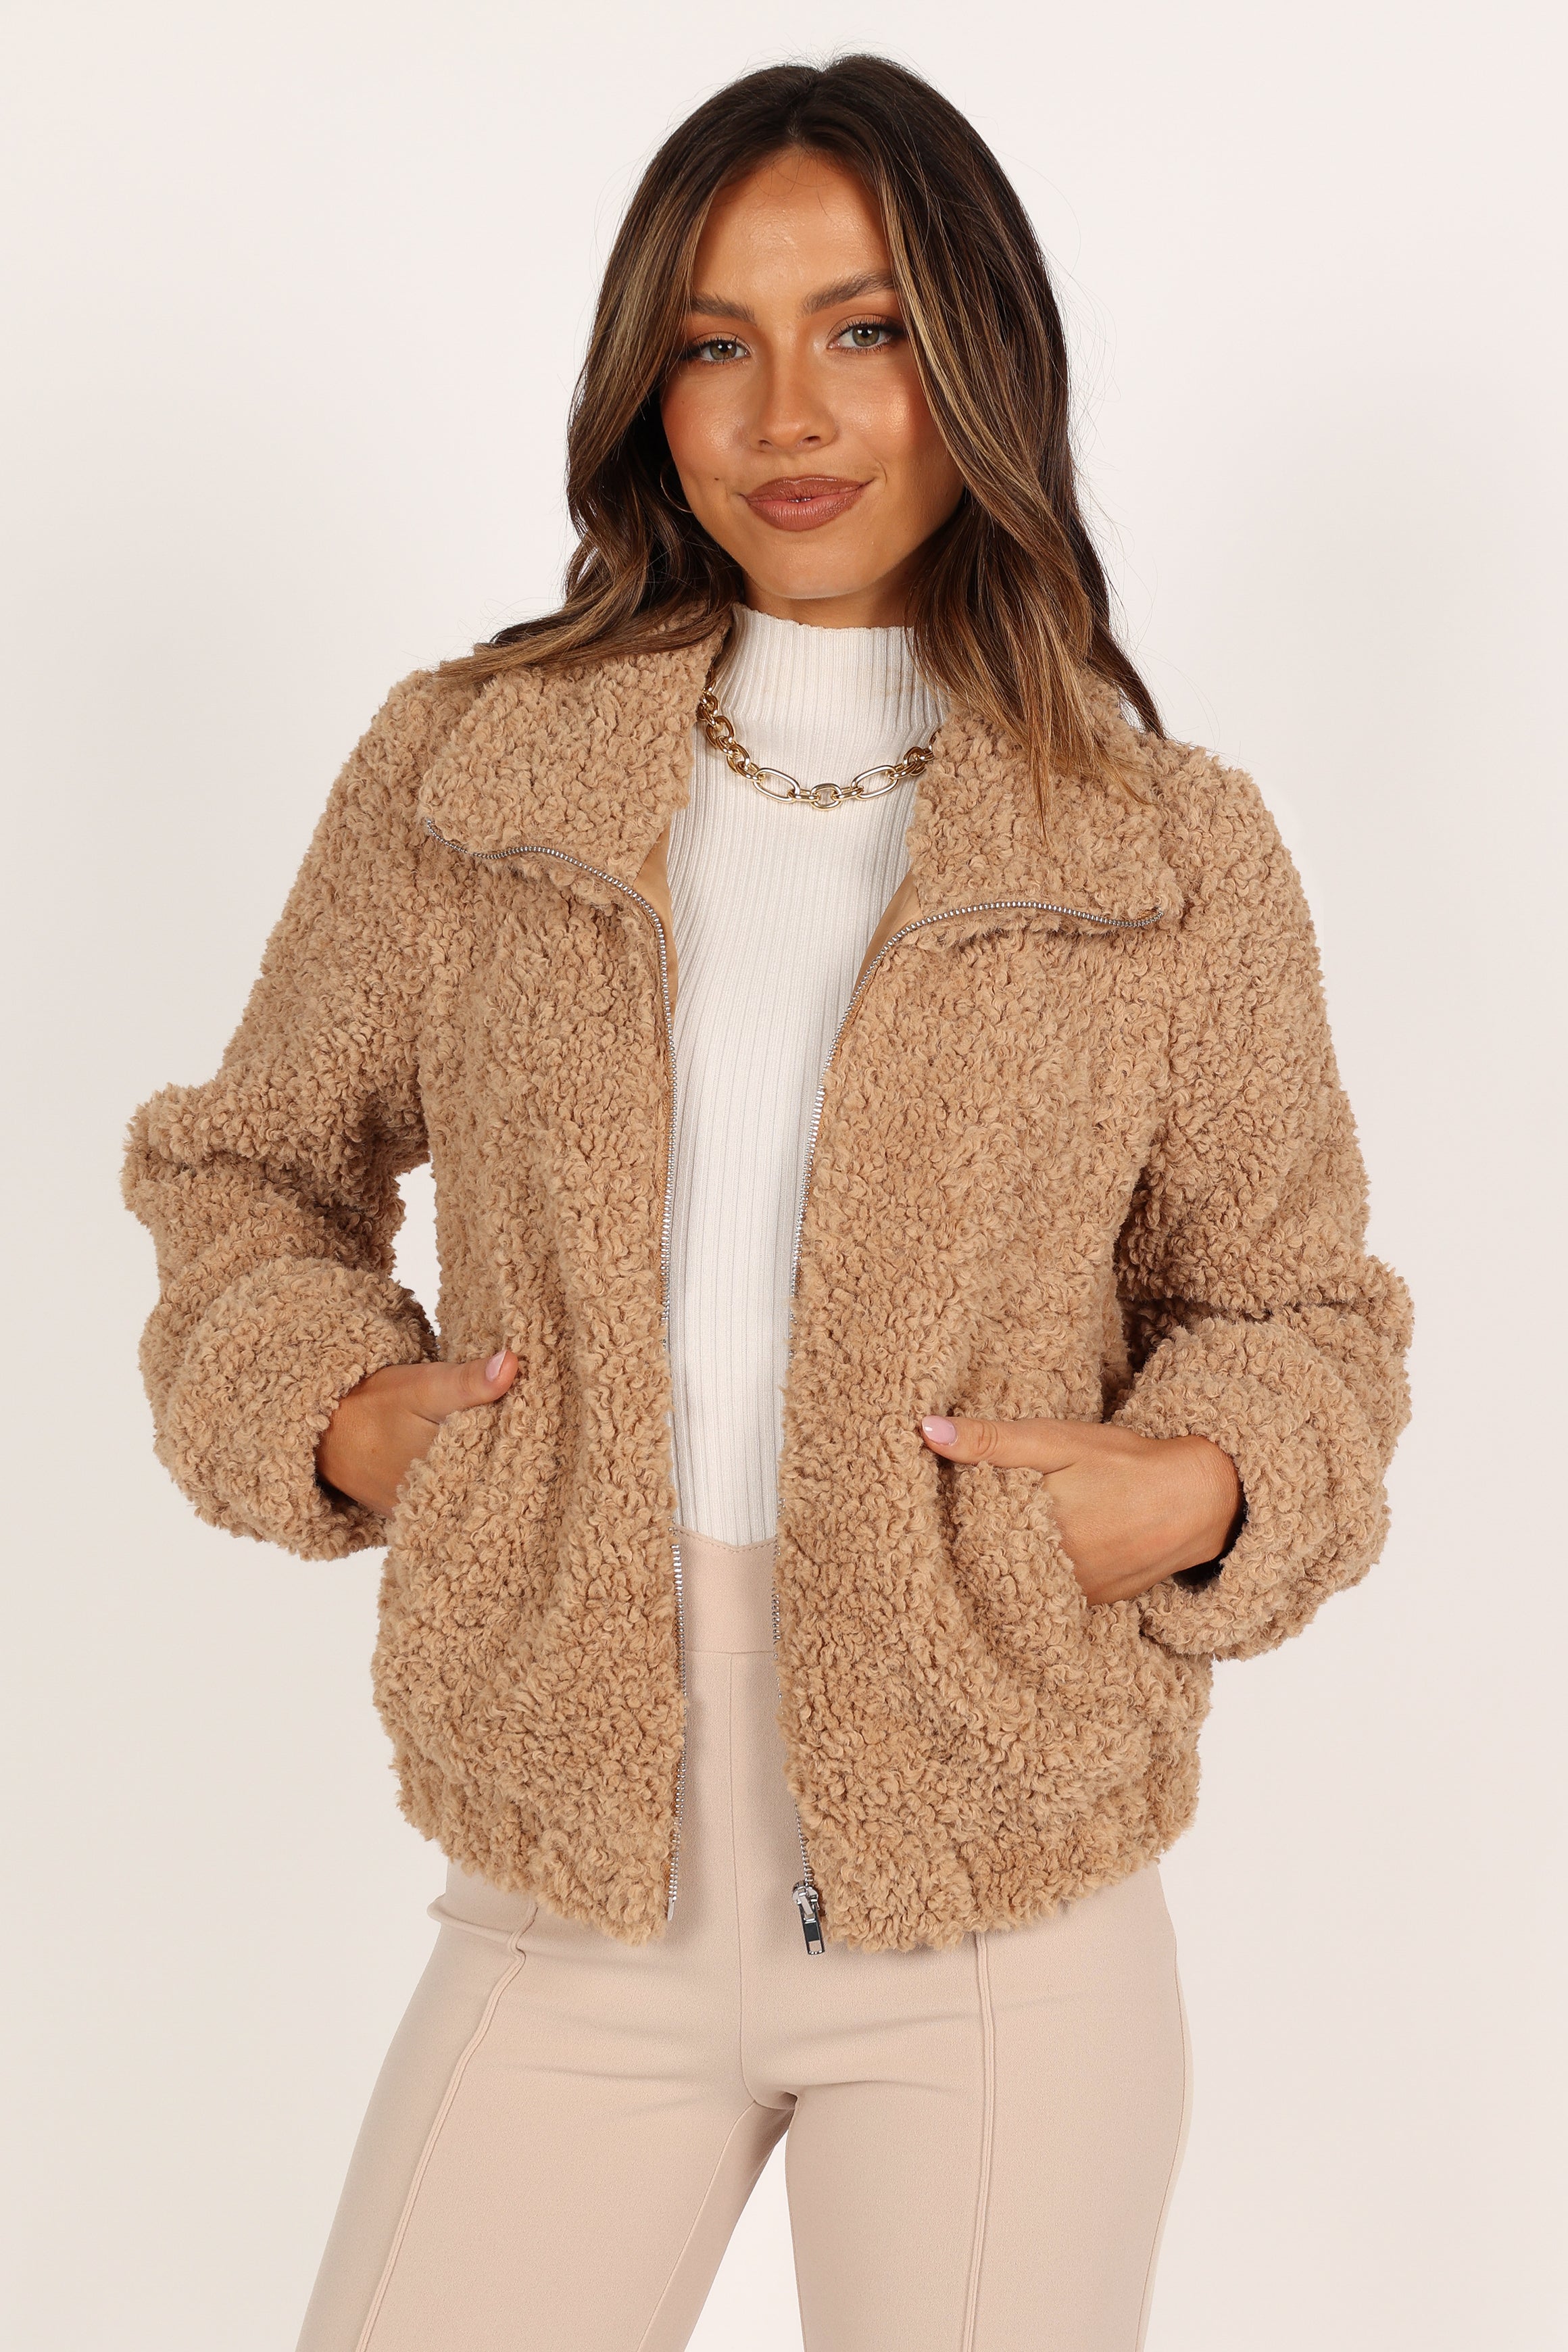  jovati Today 2023Women Oversized Fuzzy Warm Jackets Fall Plush  and Thick Standing Collar Zipper Up Fashion Winter Coat Fleece  CardiganDeals Under 10 Dollars : Sports & Outdoors